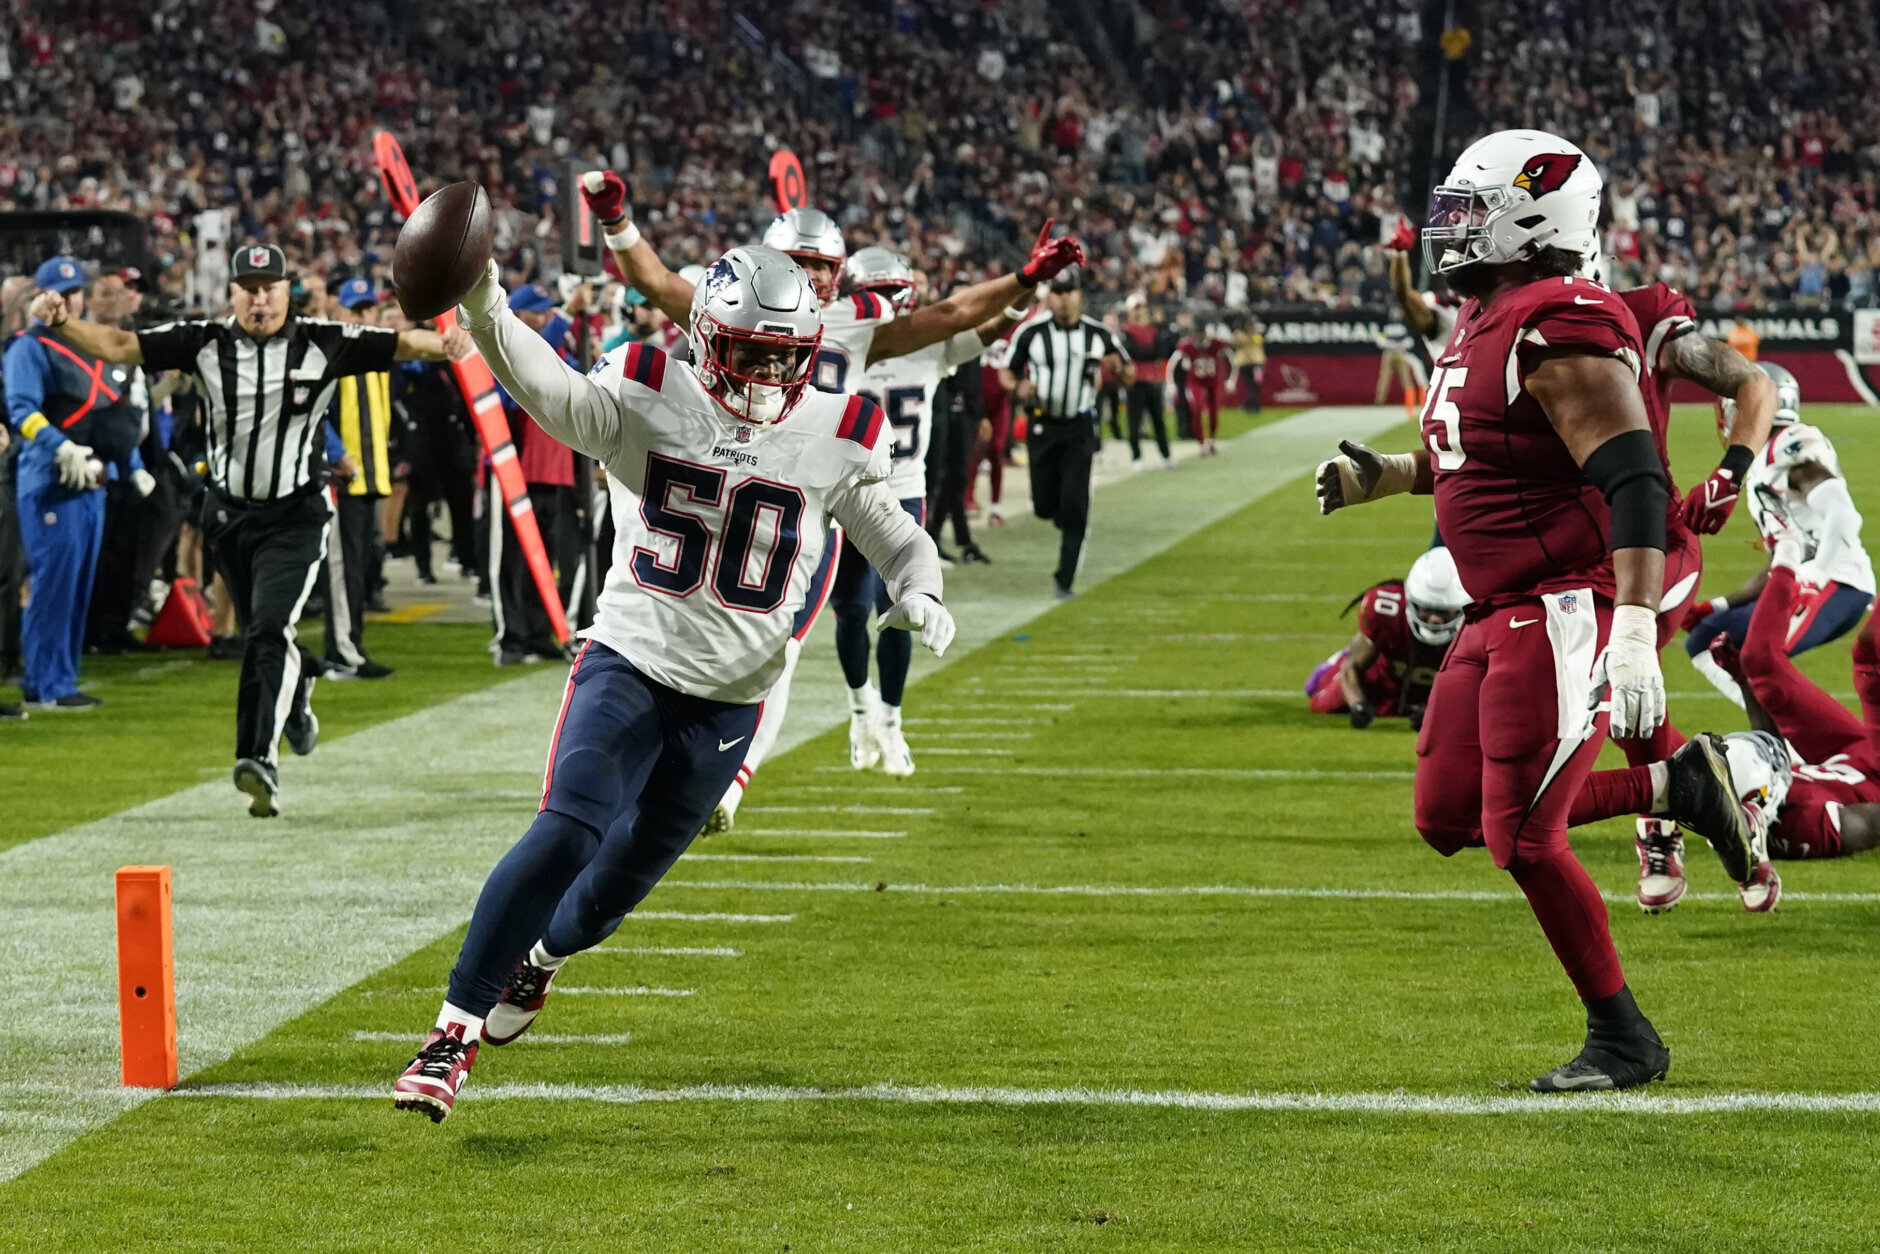 <p><b><i>Patriots 27</i></b><br />
<b><i>Cardinals 13</i></b></p>
<p>In the Monday nighter no one asked for, <a href="https://profootballtalk.nbcsports.com/2022/12/09/vance-joseph-patriots-offense-looks-like-how-a-defensive-guy-would-call-plays/">New England&#8217;s predictable offense</a> was bailed out by a Patriots defense facing Colt &#8220;Why Is He Still On An NFL Roster&#8221; McCoy instead of Kyler Murray.</p>
<p>Here&#8217;s two fearless predictions: The Pats make the playoffs and get the brakes beat off them by the Bills in the wild card round and the Cardinals will be the NFL&#8217;s worst team in 2023 with Murray sidelined with <a href="https://www.espn.com/nfl/story/_/id/35241337/kyler-murray-carted-knee-injury-cardinals-first-drive">a near-certain ACL tear</a>.</p>
